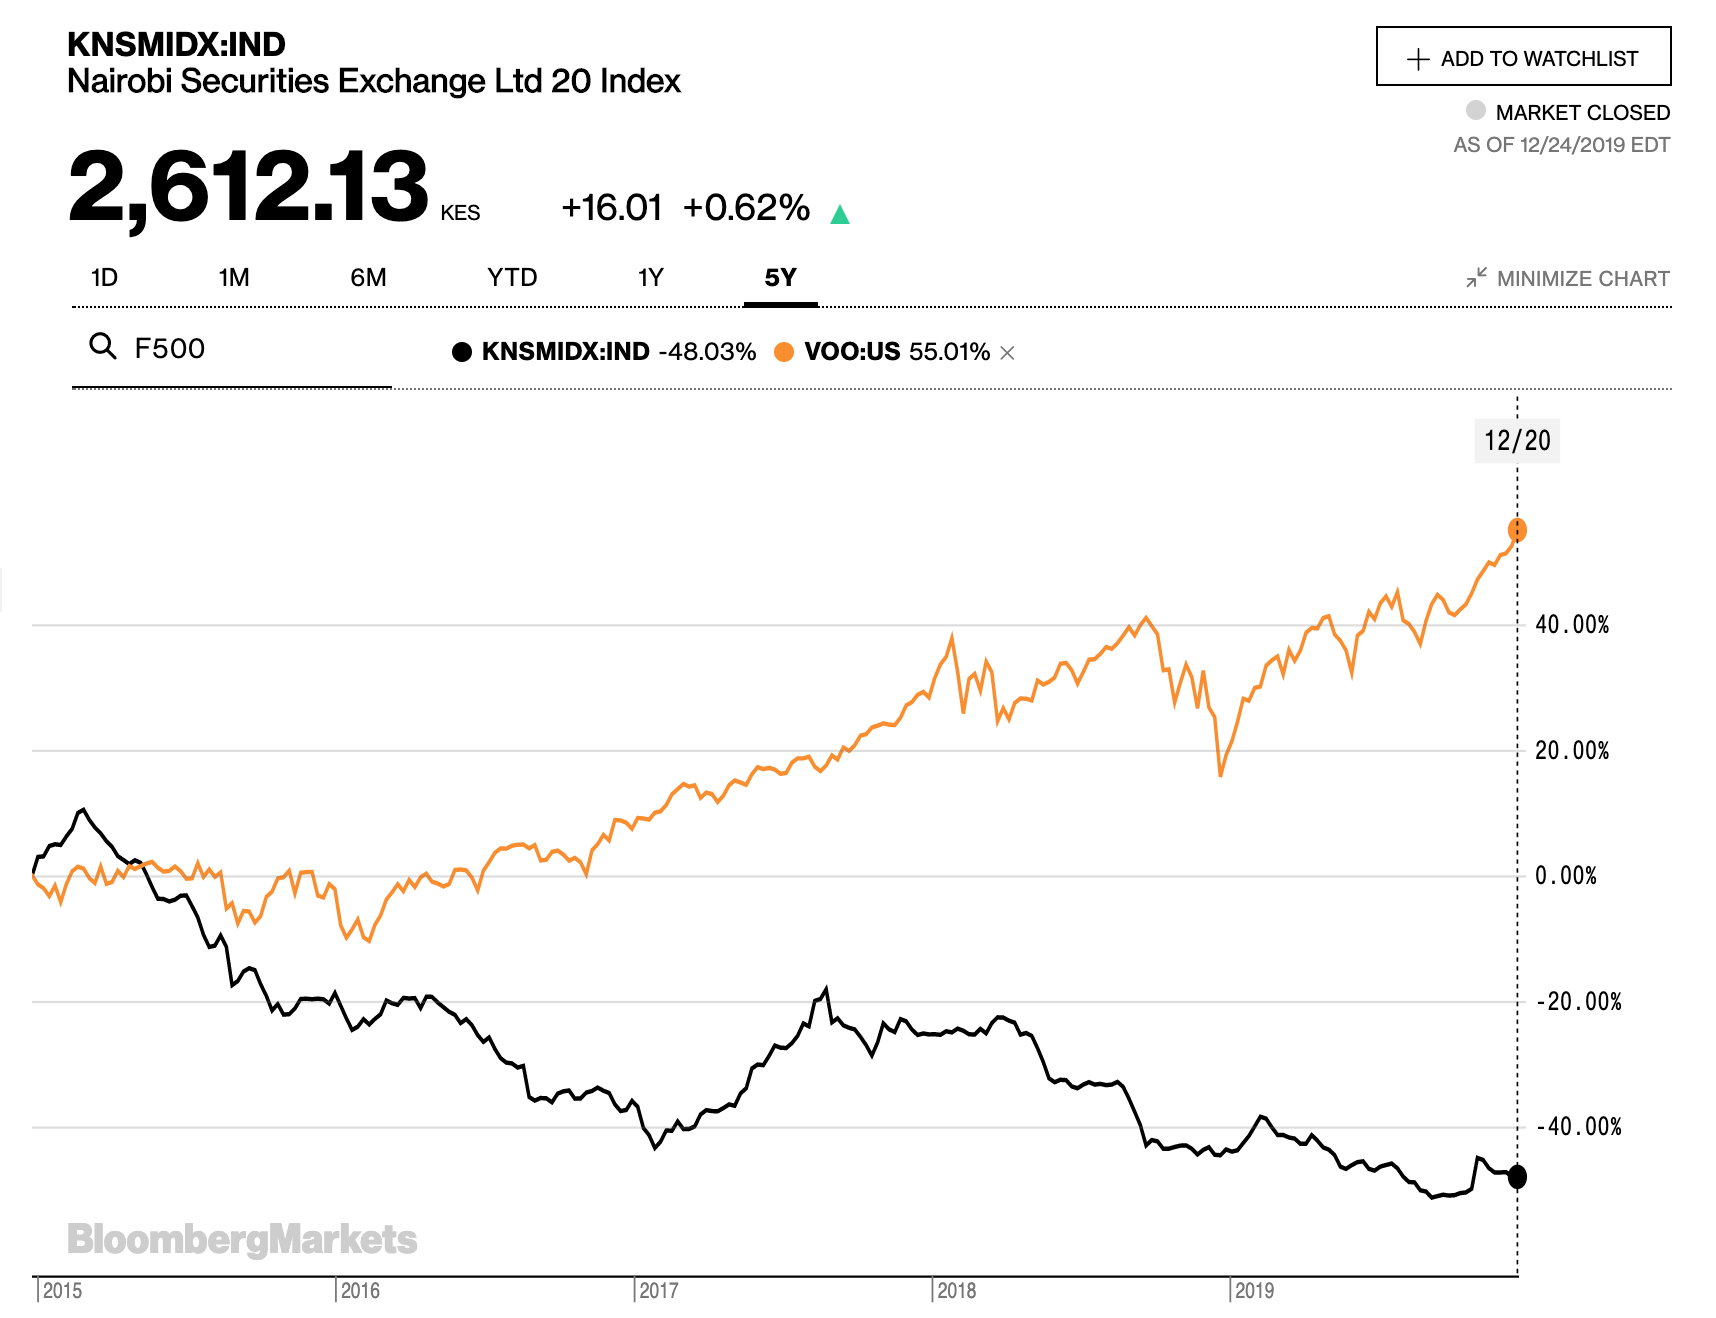 The NSE 20 compared to the S&P 500 over 5 years (2015 - 2019). The
  NSE 20 lost 48%, while the Fortune 500 gained 55%. Credits:
  https://www.bloomberg.com/quote/KNSMIDX:IND